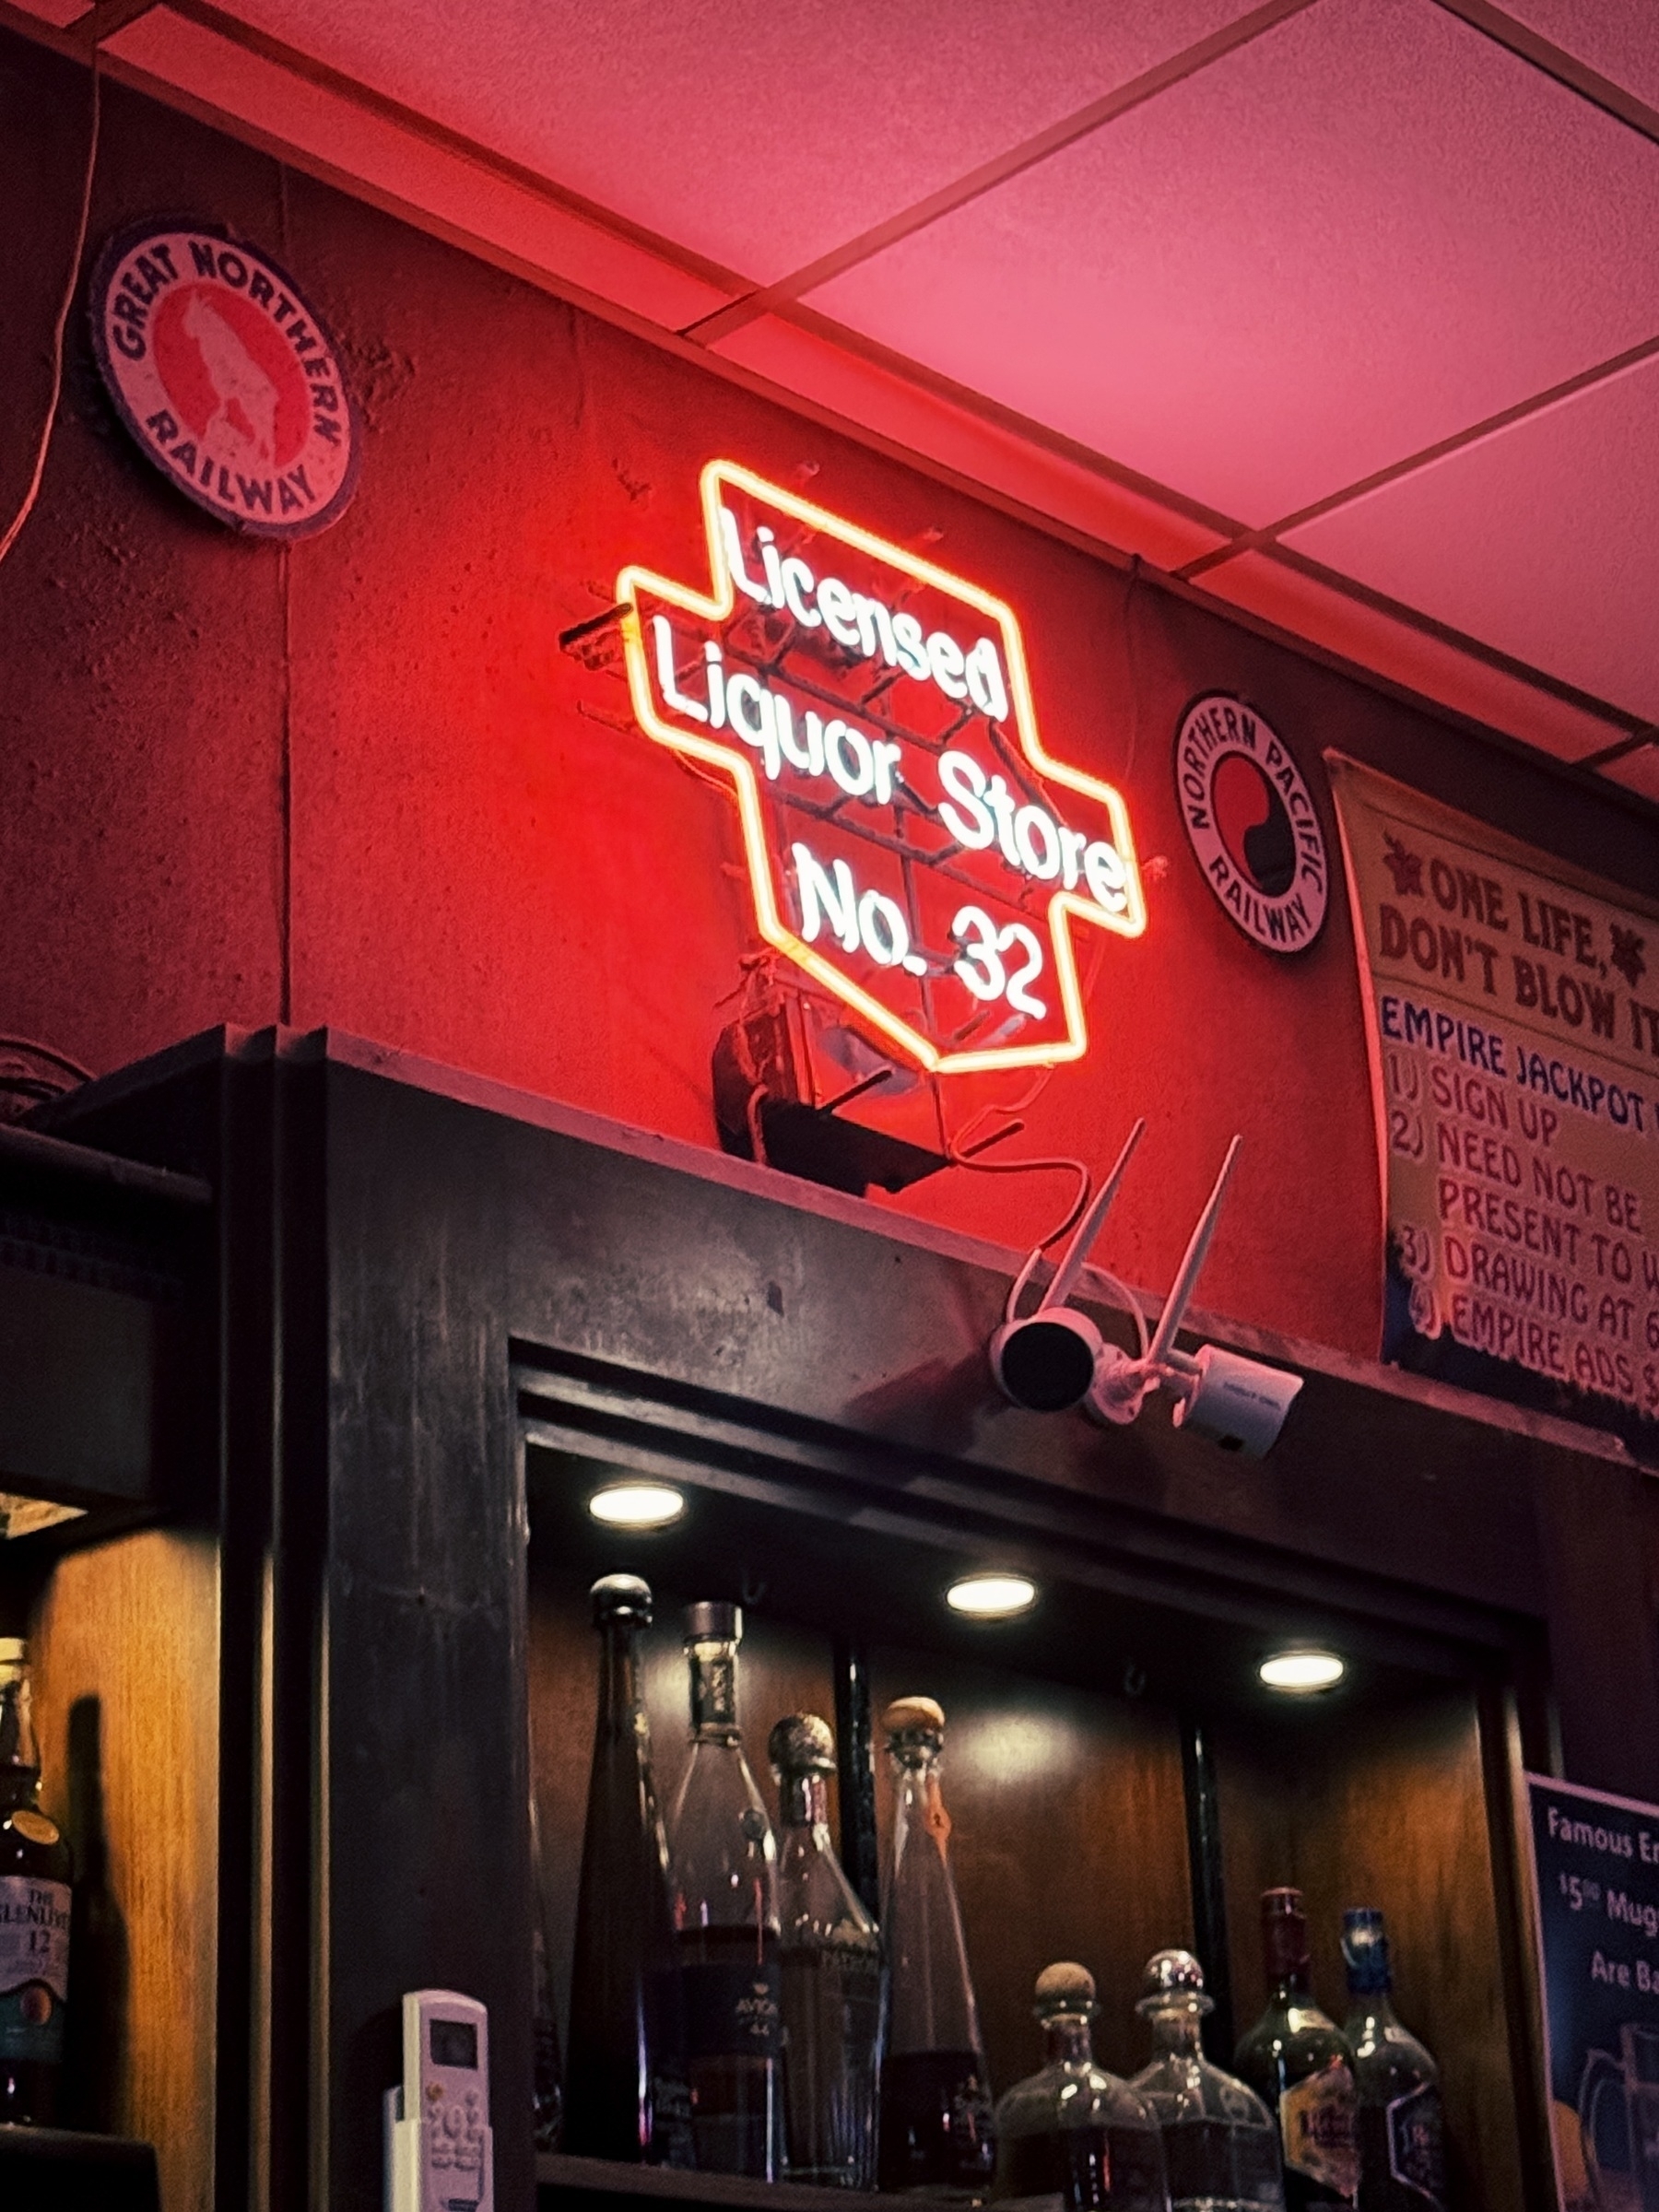 Glowing red neon light inside bar that reads Licensed Liquor Store No. 32